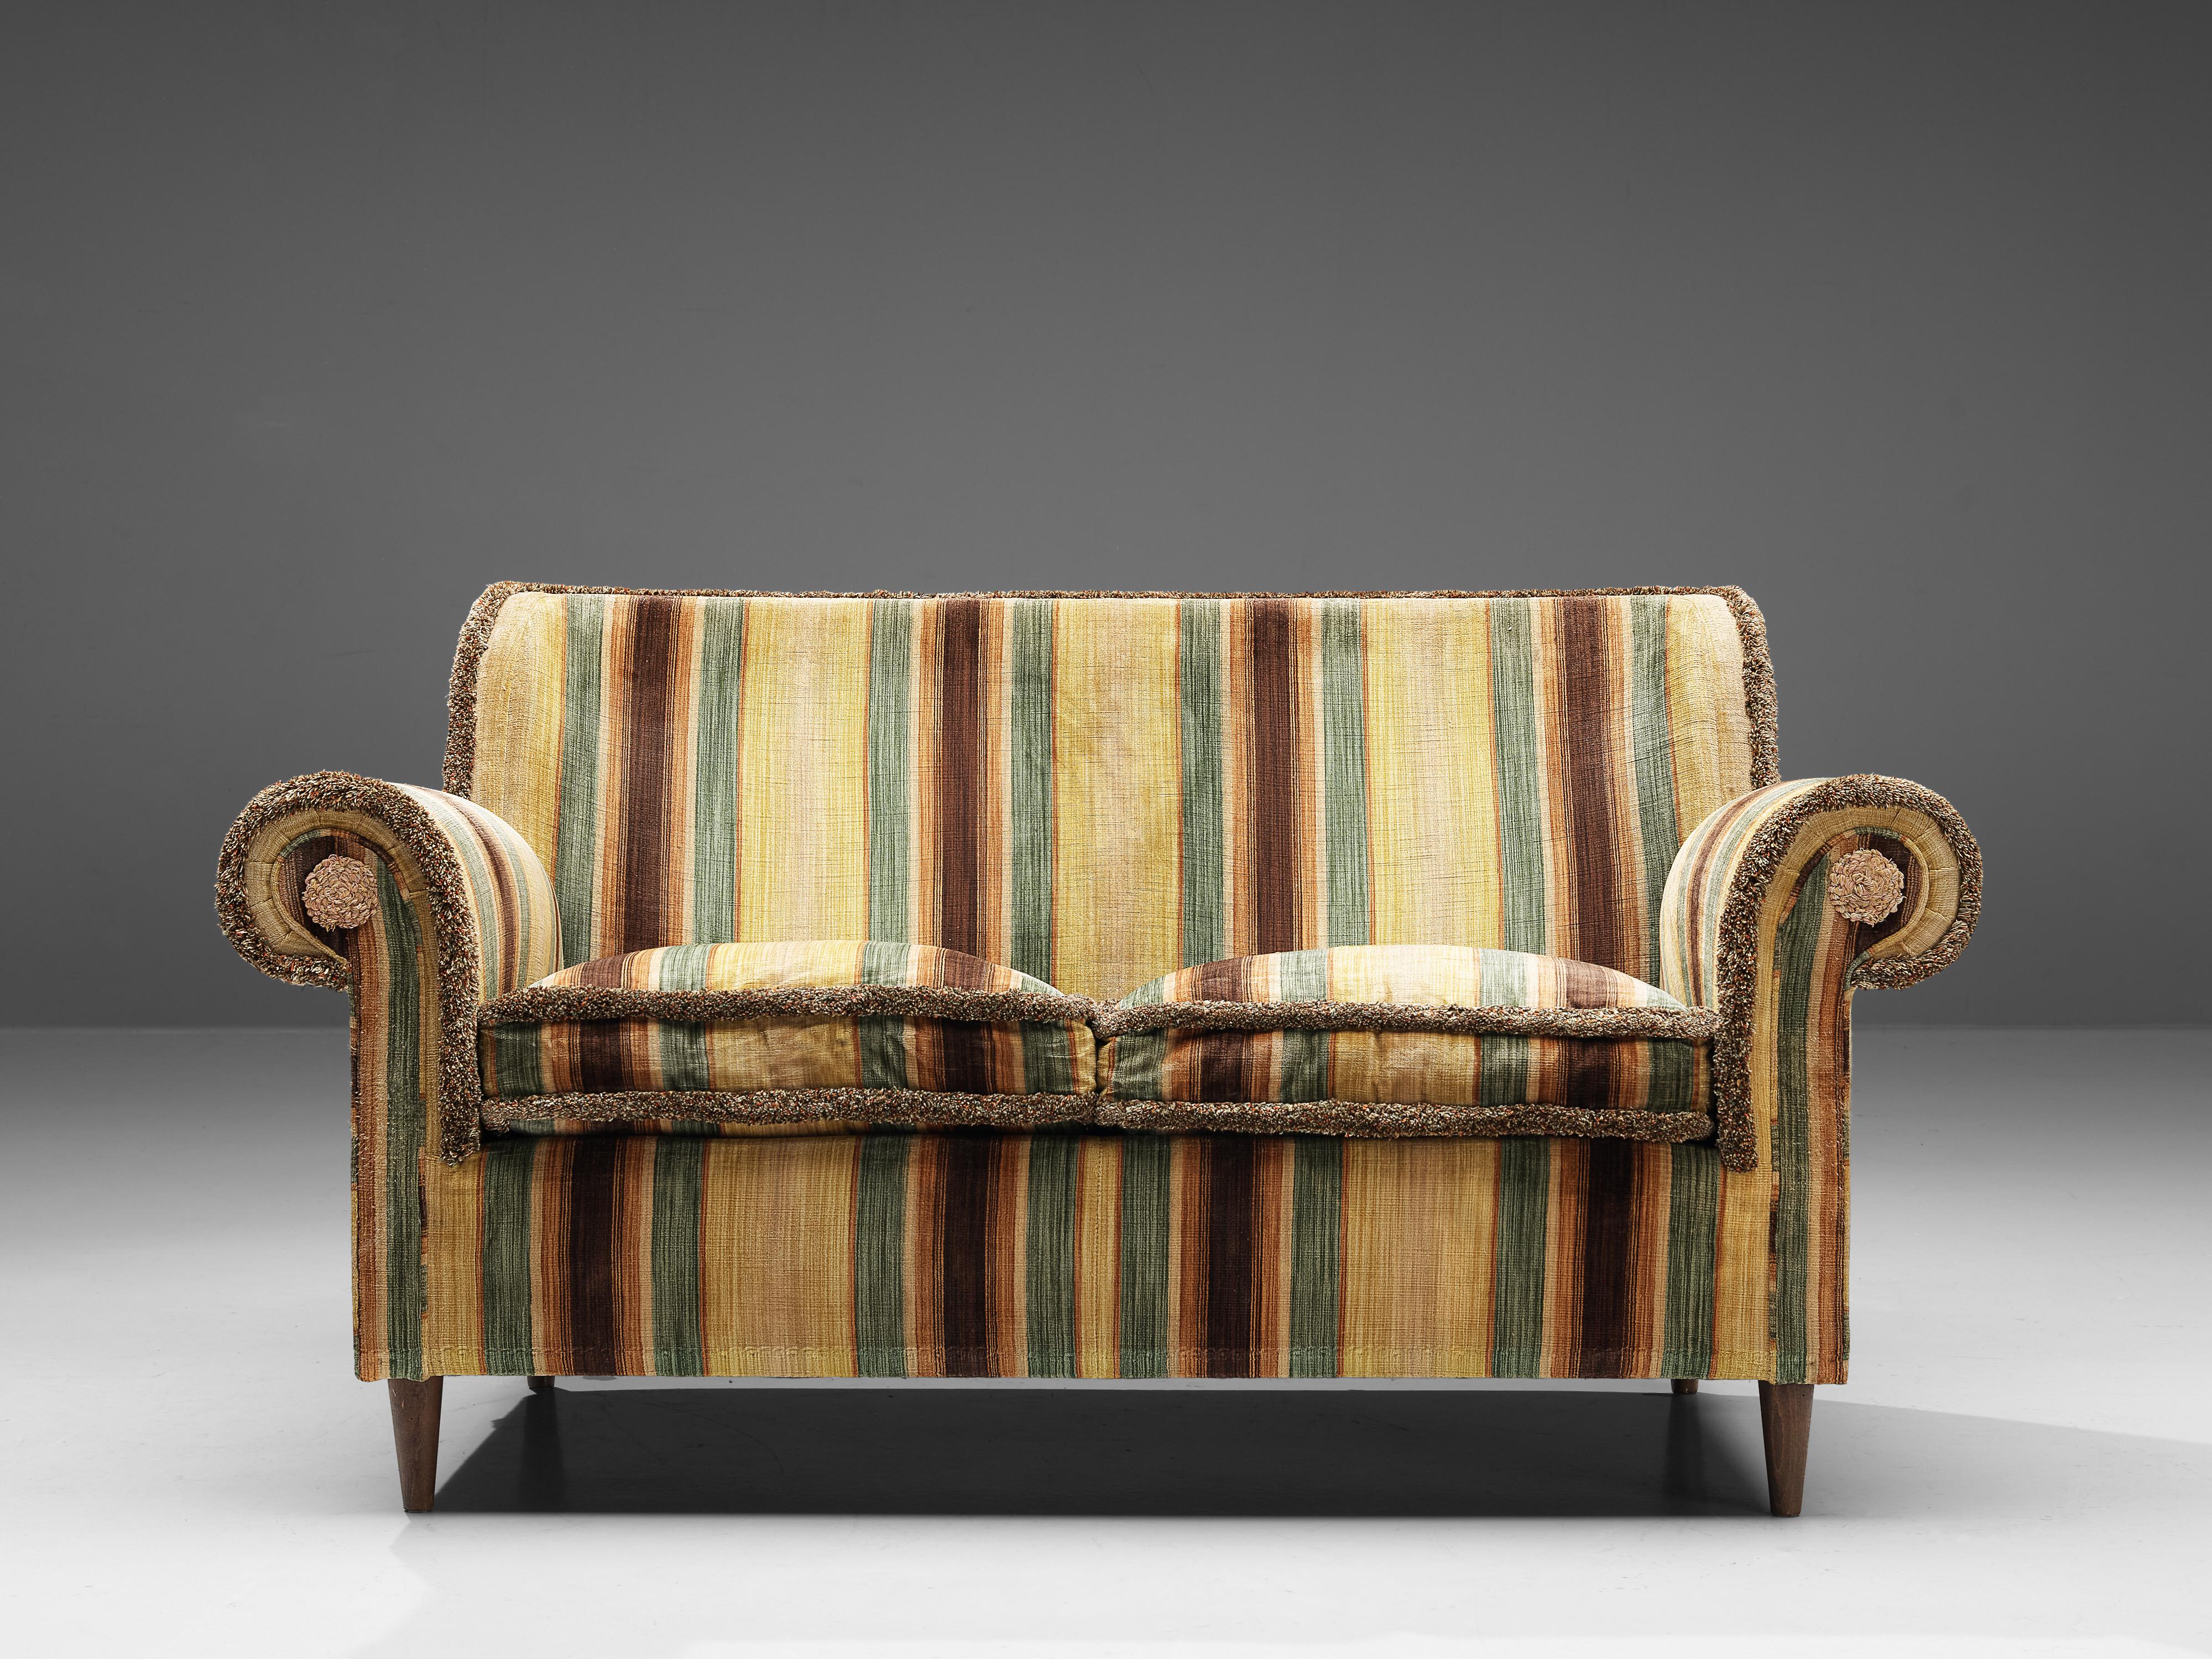 Sofa, fabric, beech, Italy, 1960s

This charming Italian sofa comes with a characteristic velvet upholstery of stripes differing in width and color tones of yellow, brown, orange and green. The design has a certain theatrical aesthetic with curled